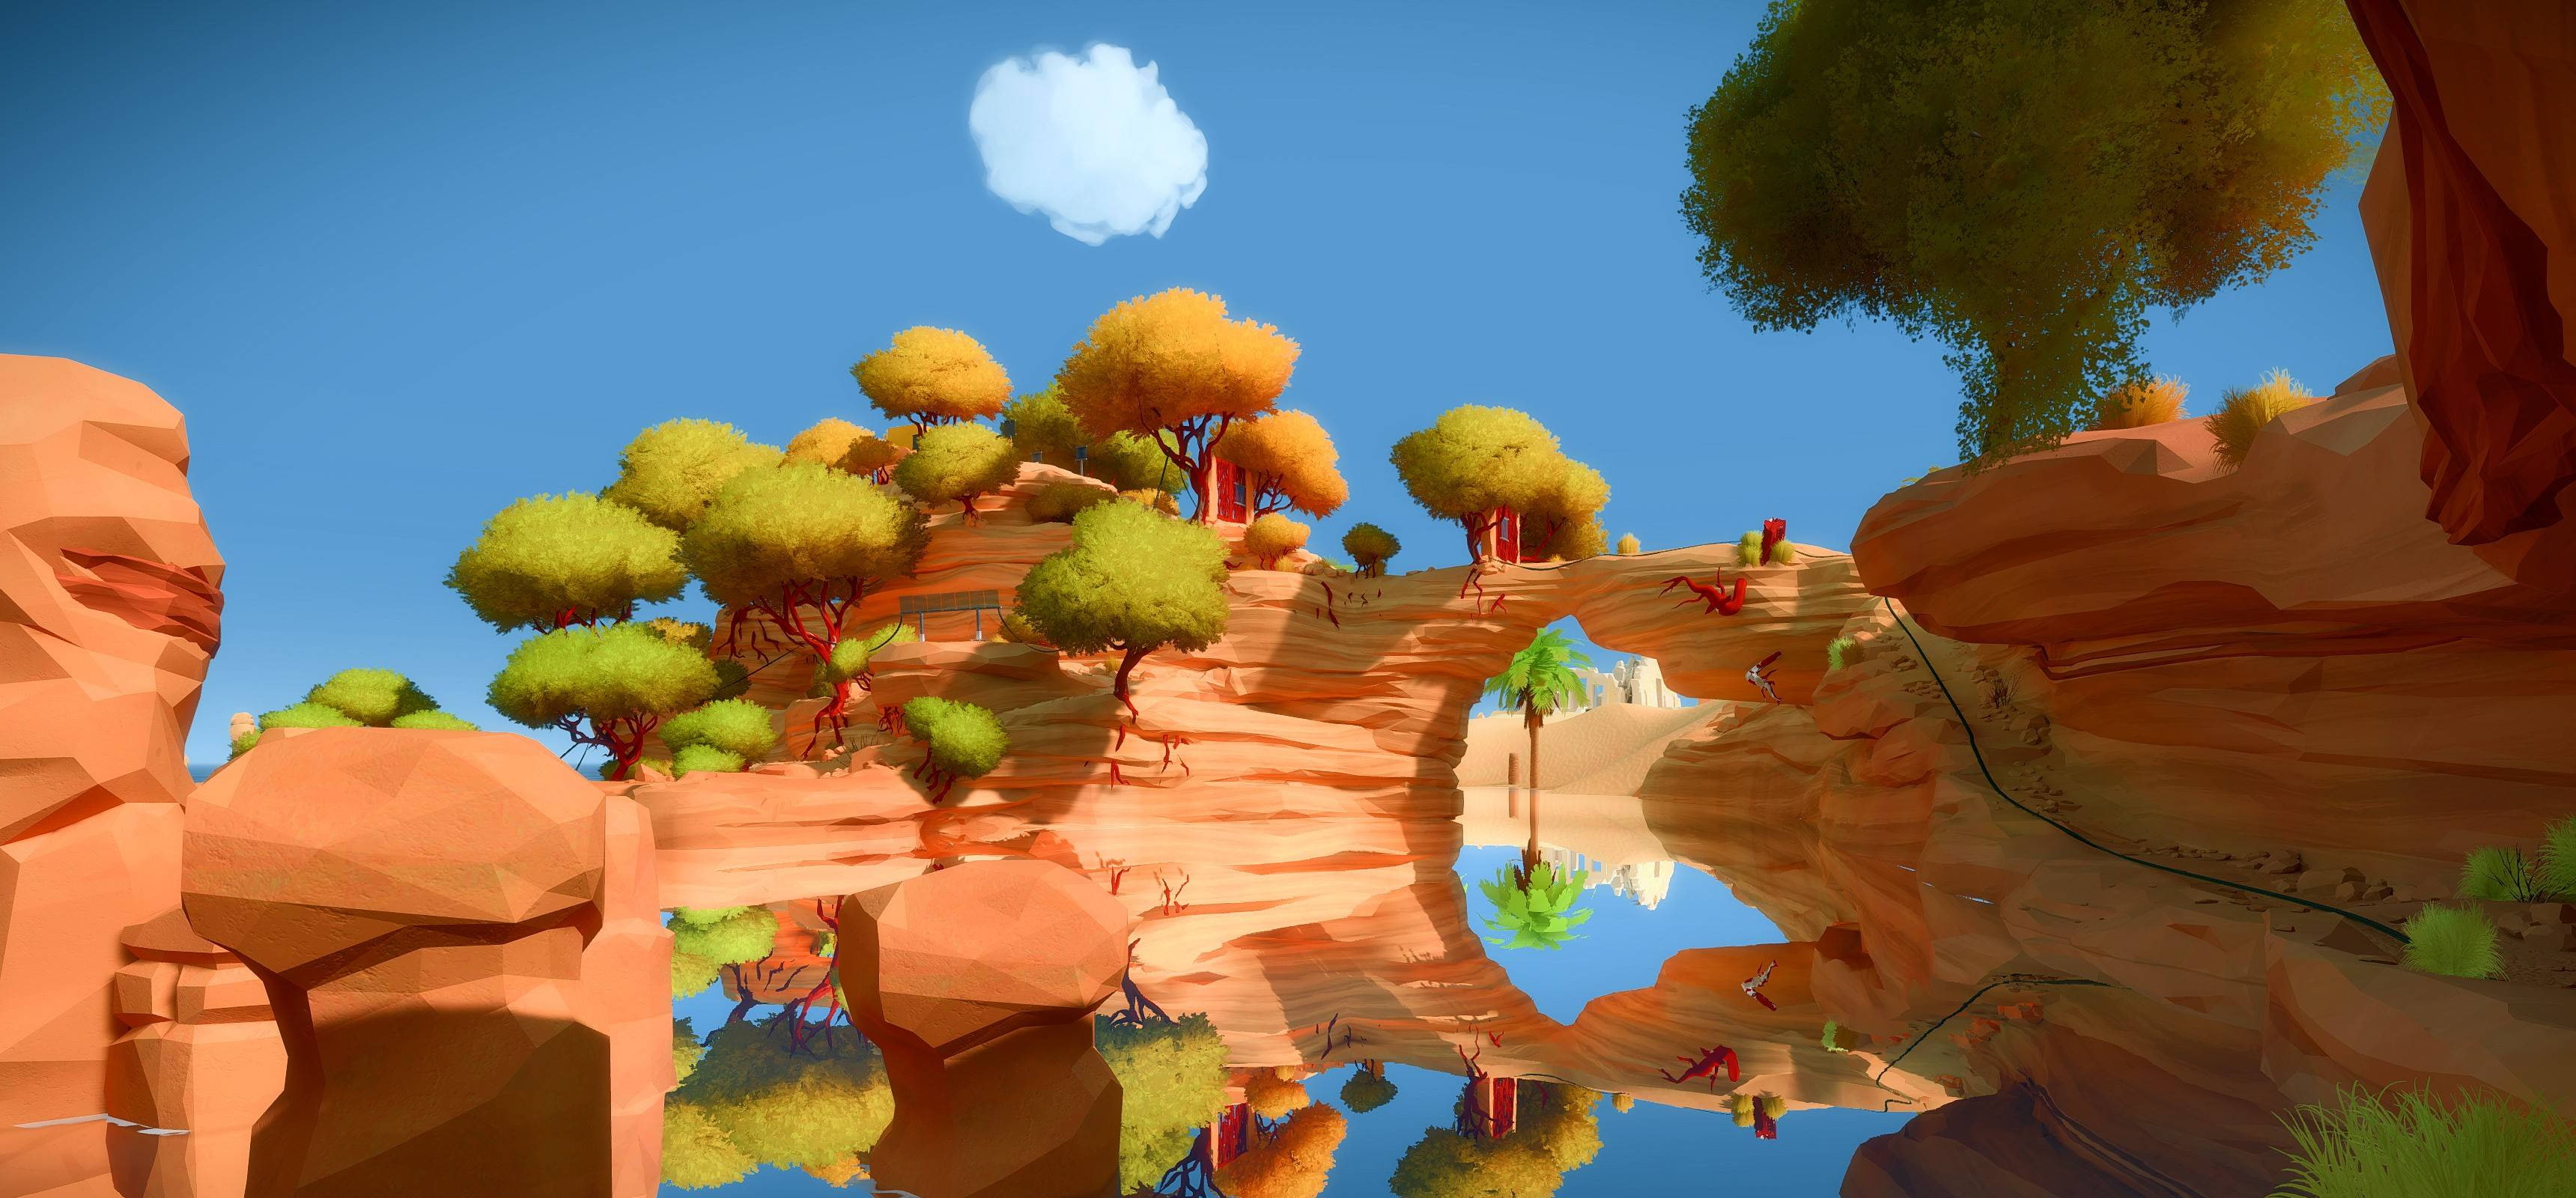 The Witness, video games, ultra-wide, sky, nature, plant, low angle view